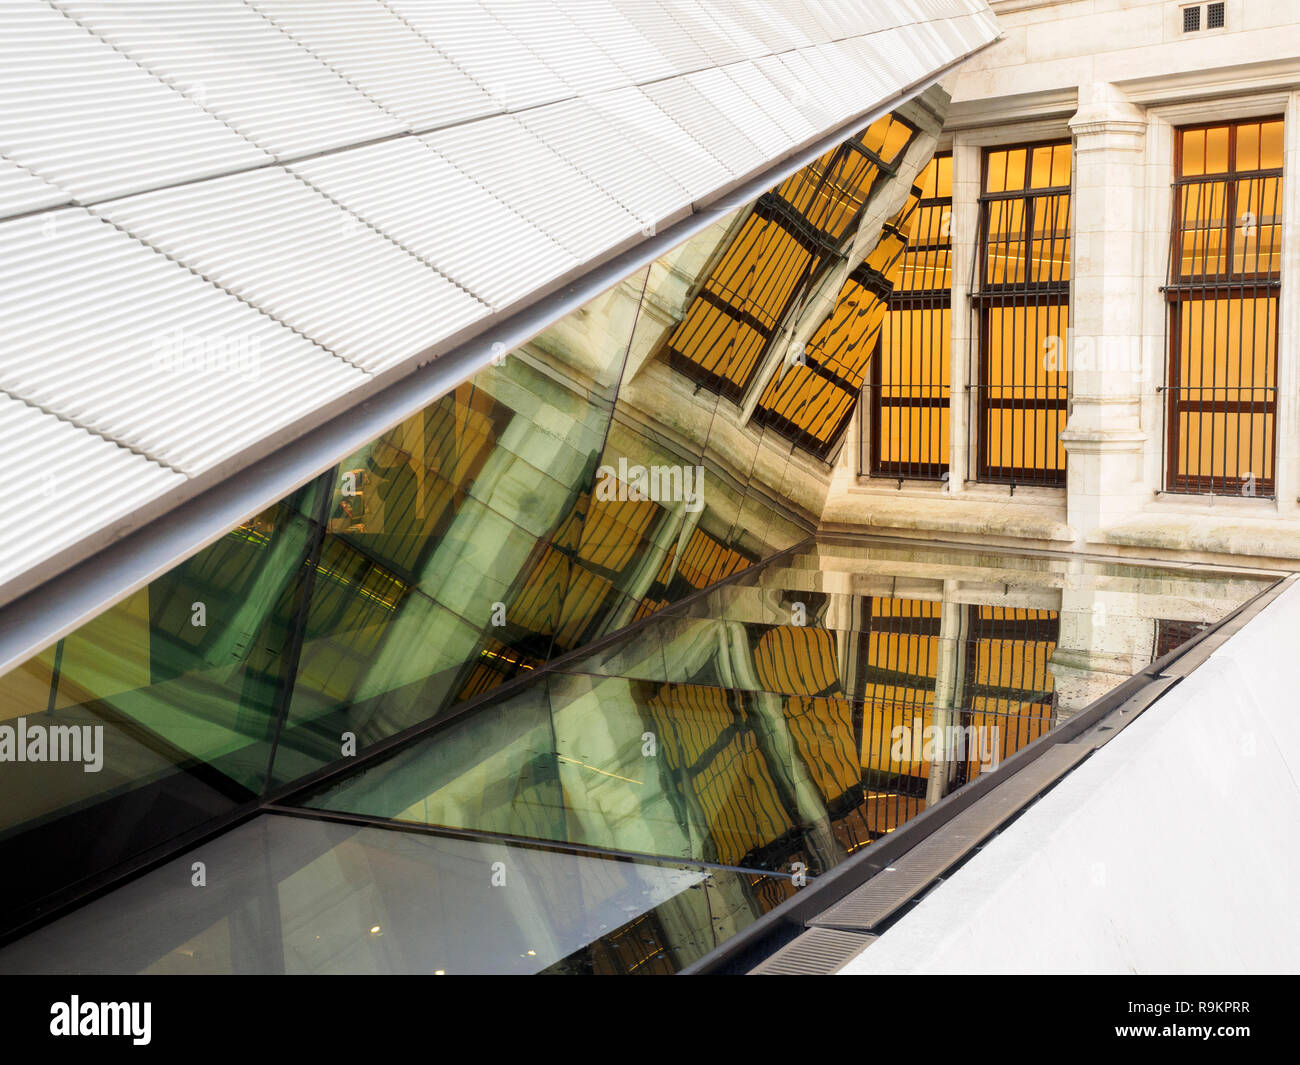 Stairs in the Victoria and Albert museum in the exhibition rd entrance - London, England Stock Photo